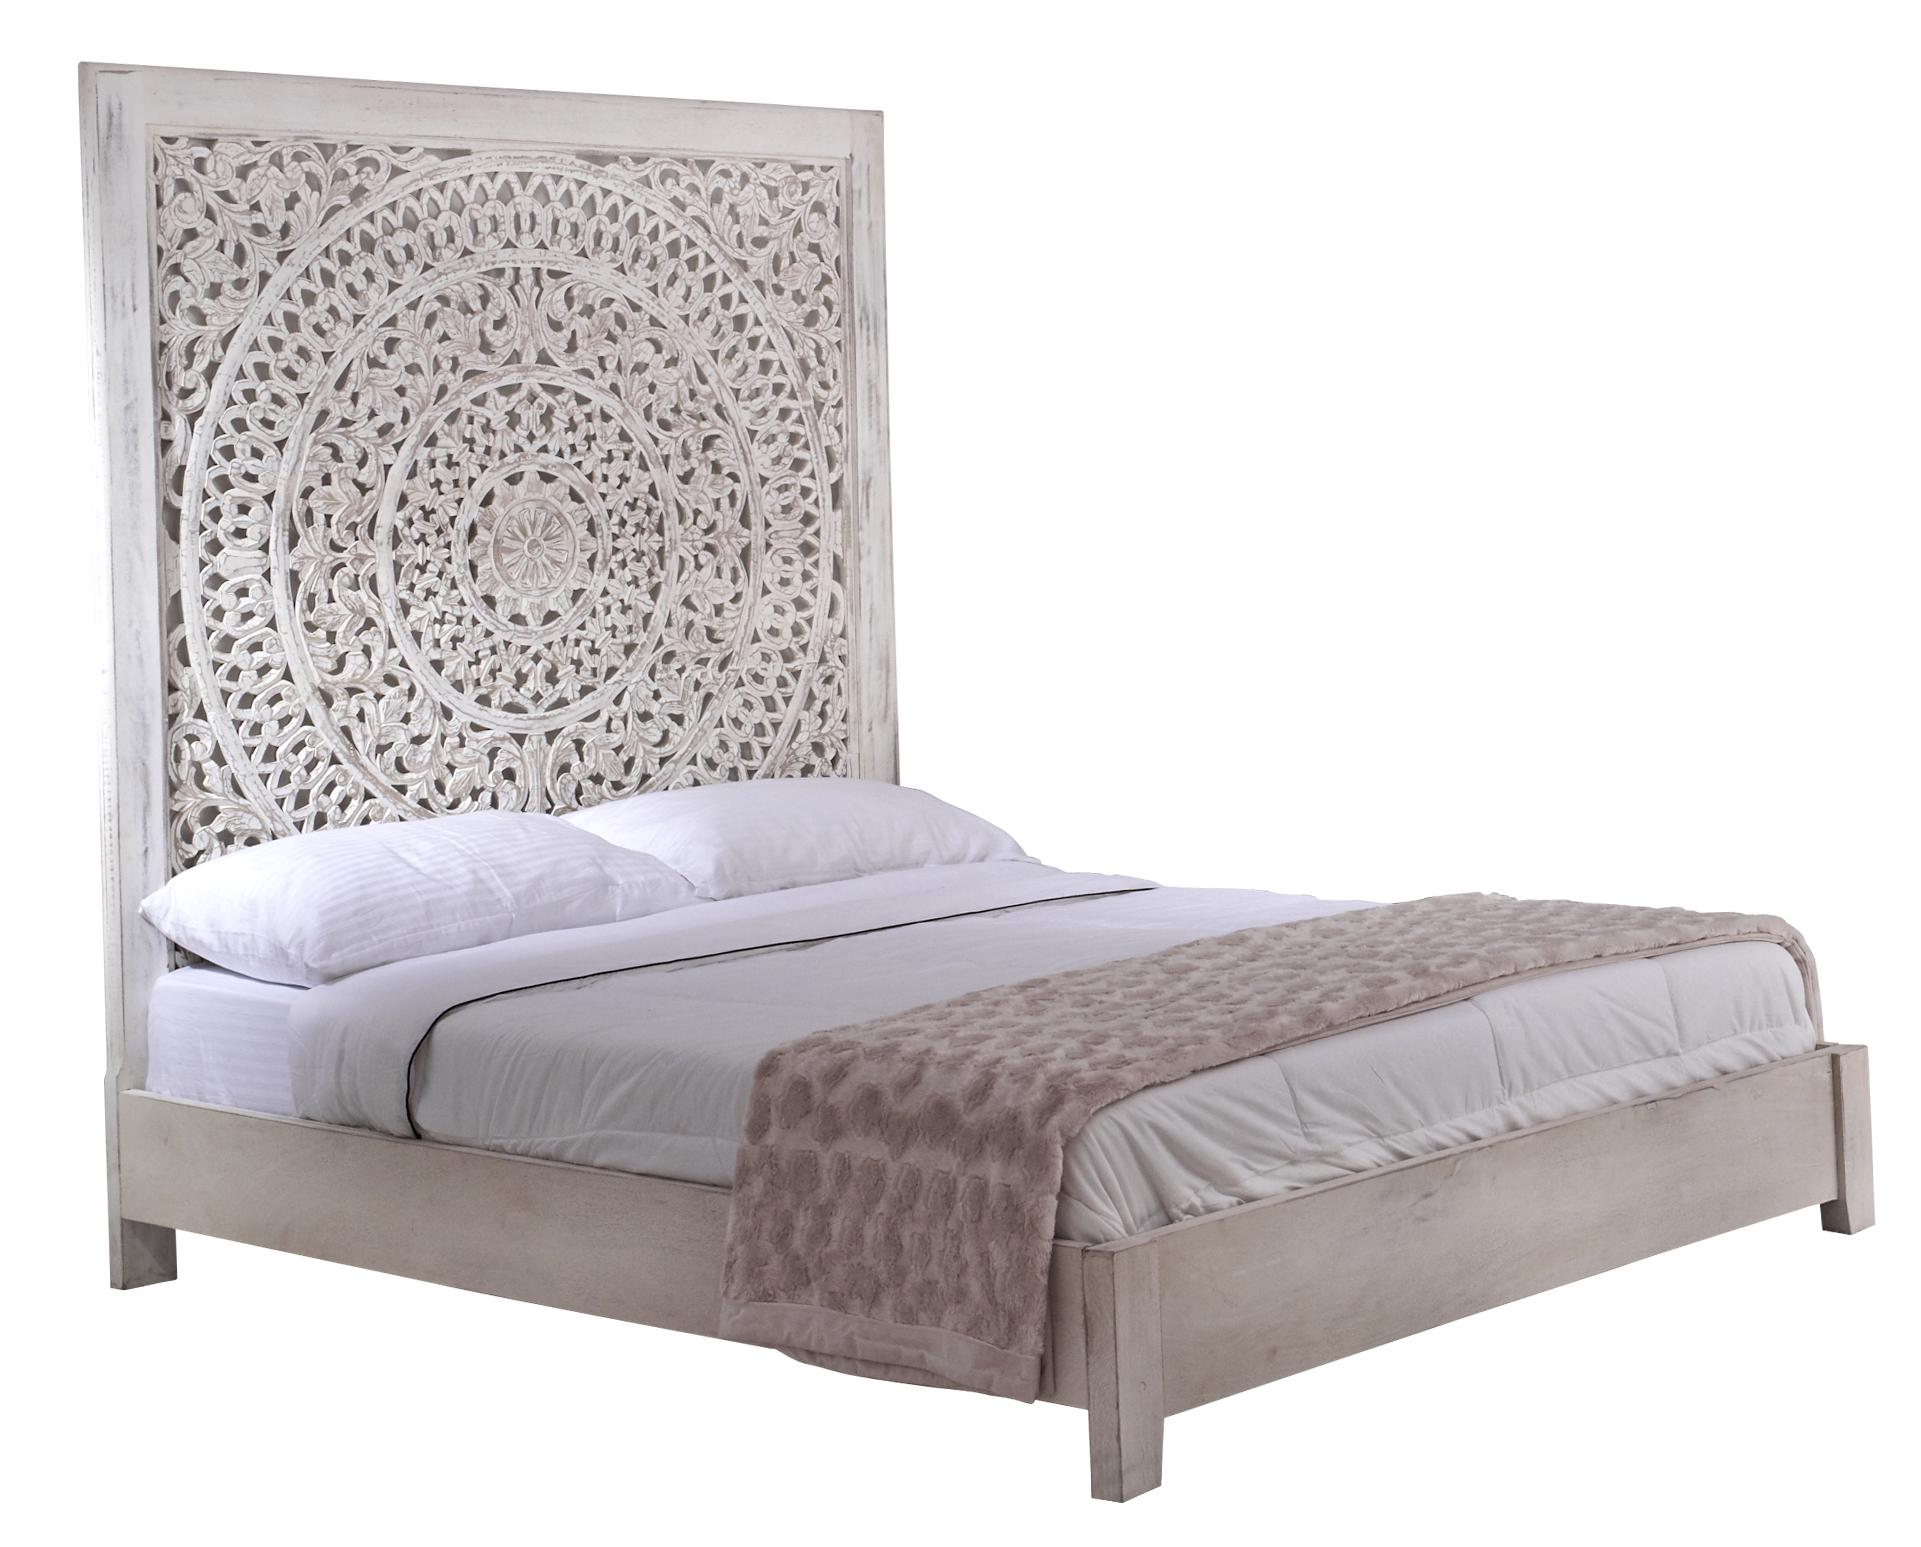 JAIPUR HOME UCS-6621 Panel Bed